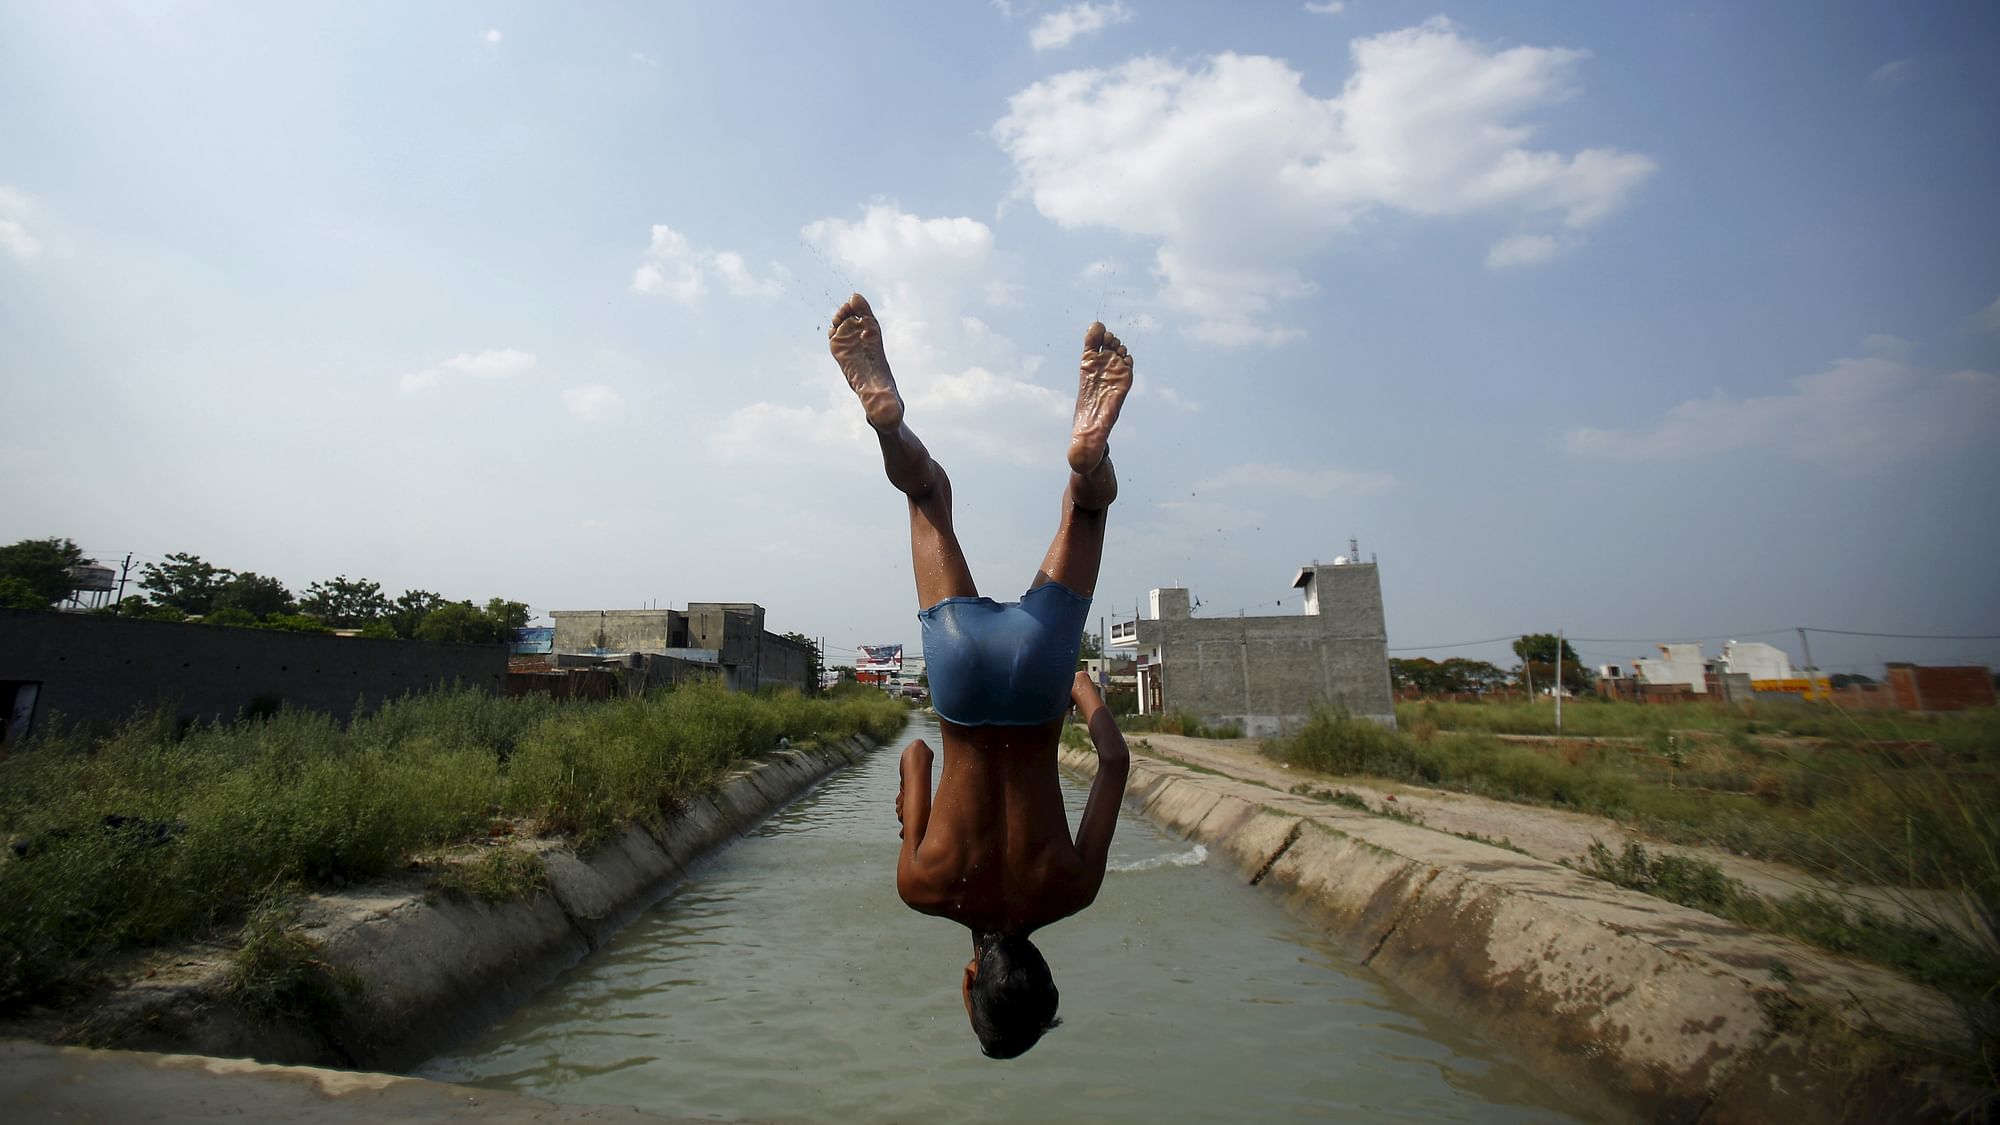 A boy jumps into a water canal to beat the heat. No, it’s not THAT bad, yet. This picture is from last summer. (Photo: Reuters)